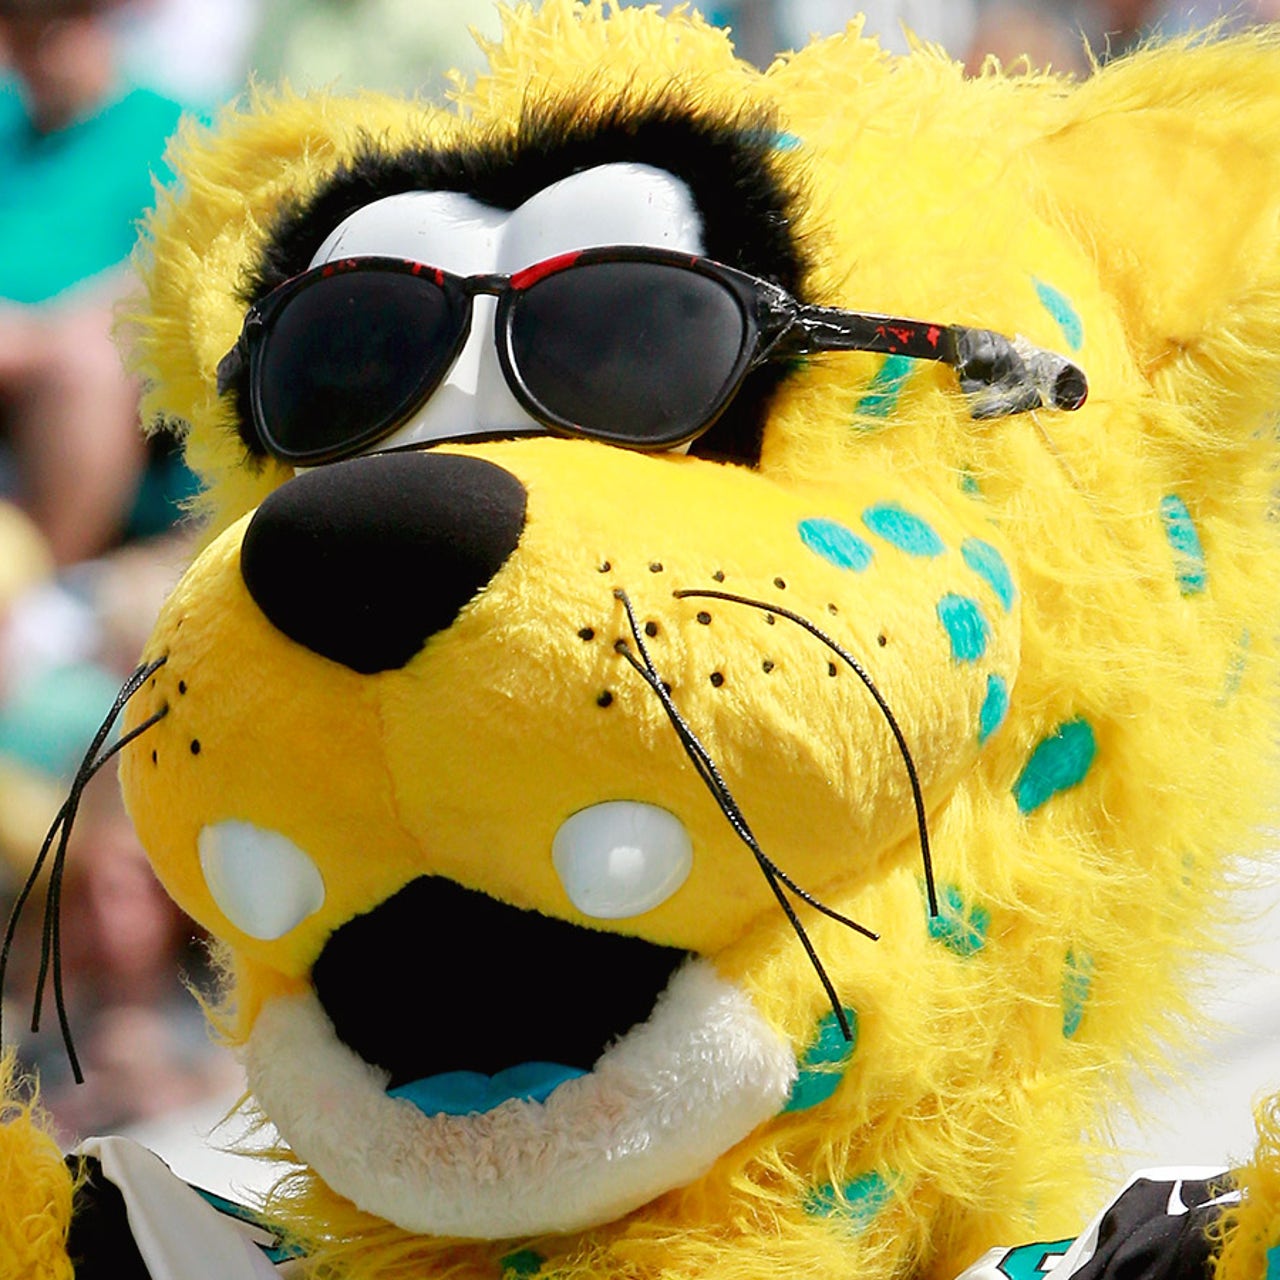 IT WAS NATIONAL MASCOT DAY: WATCH PHILLY'S FAVES!